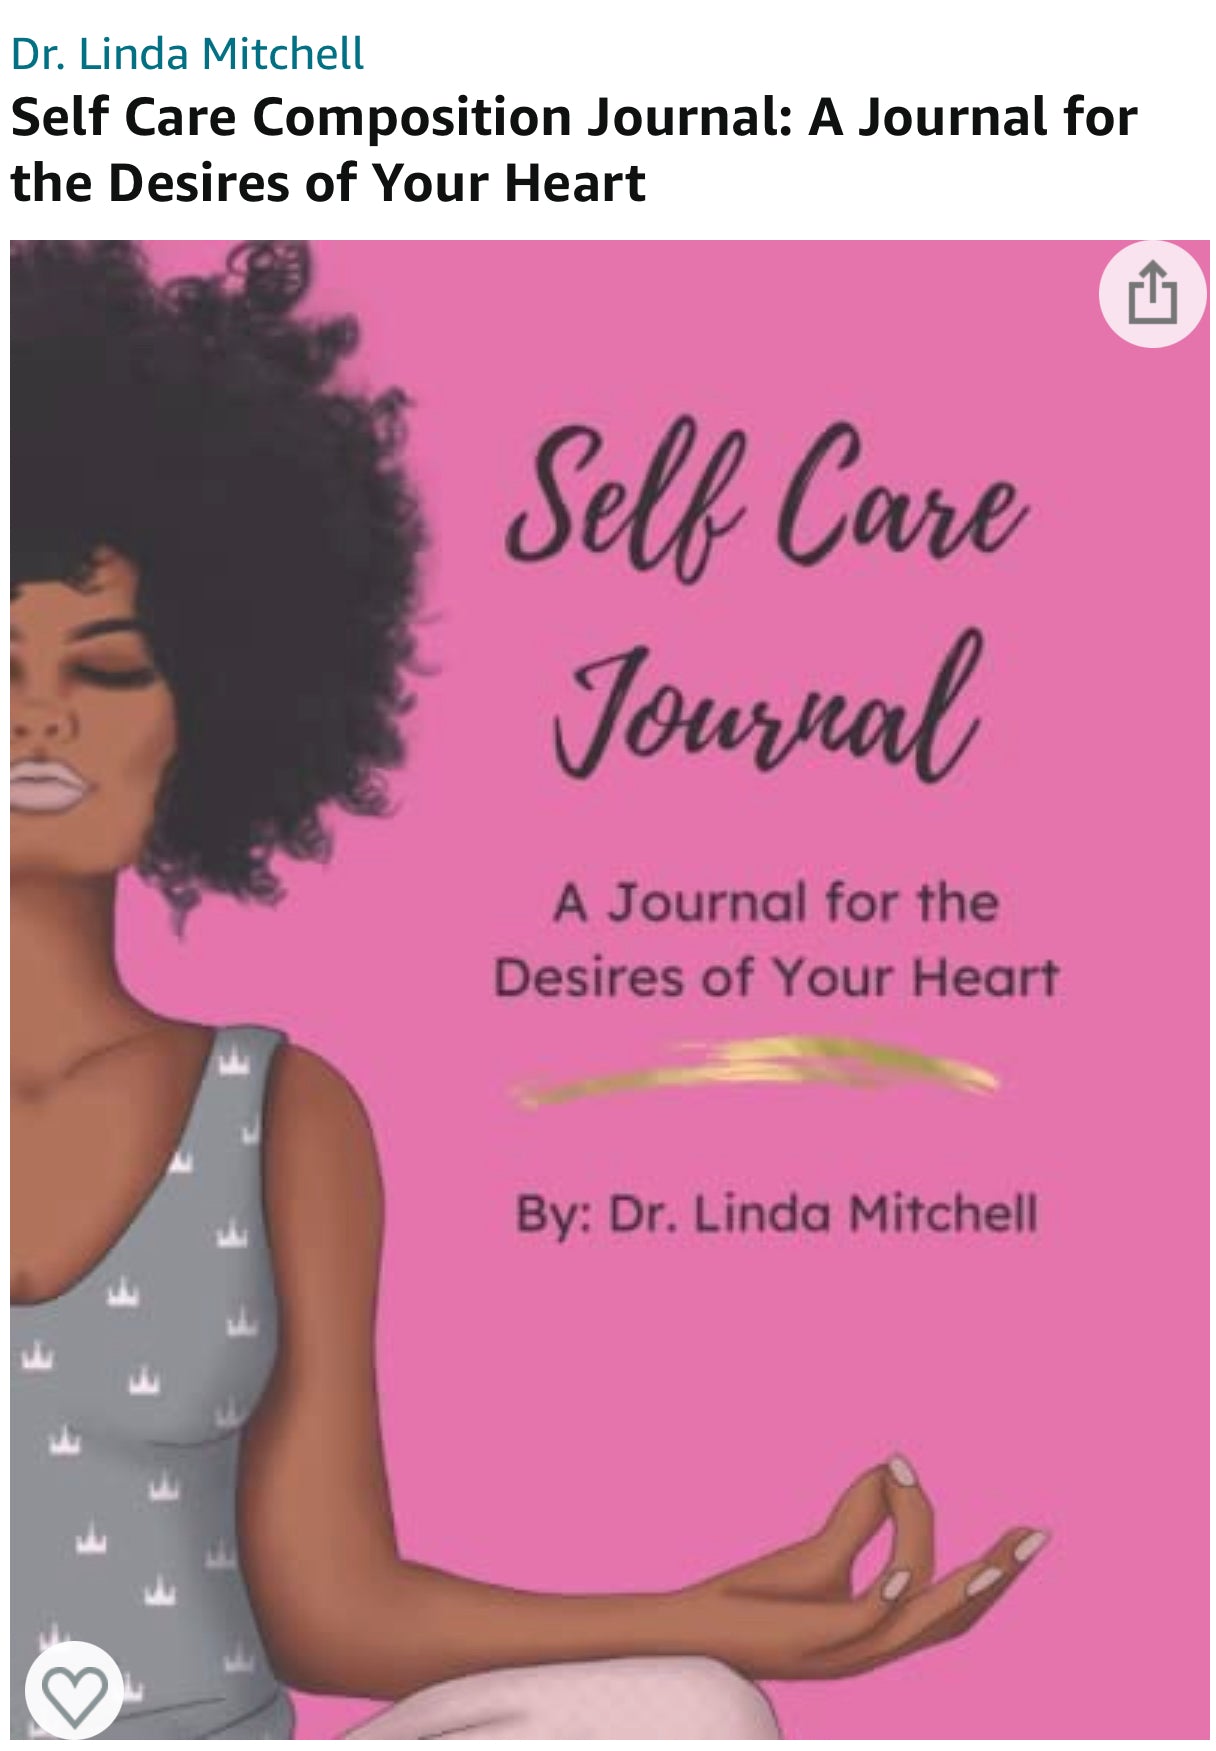 Self Care Journal: Write the desires of your heart ❤️